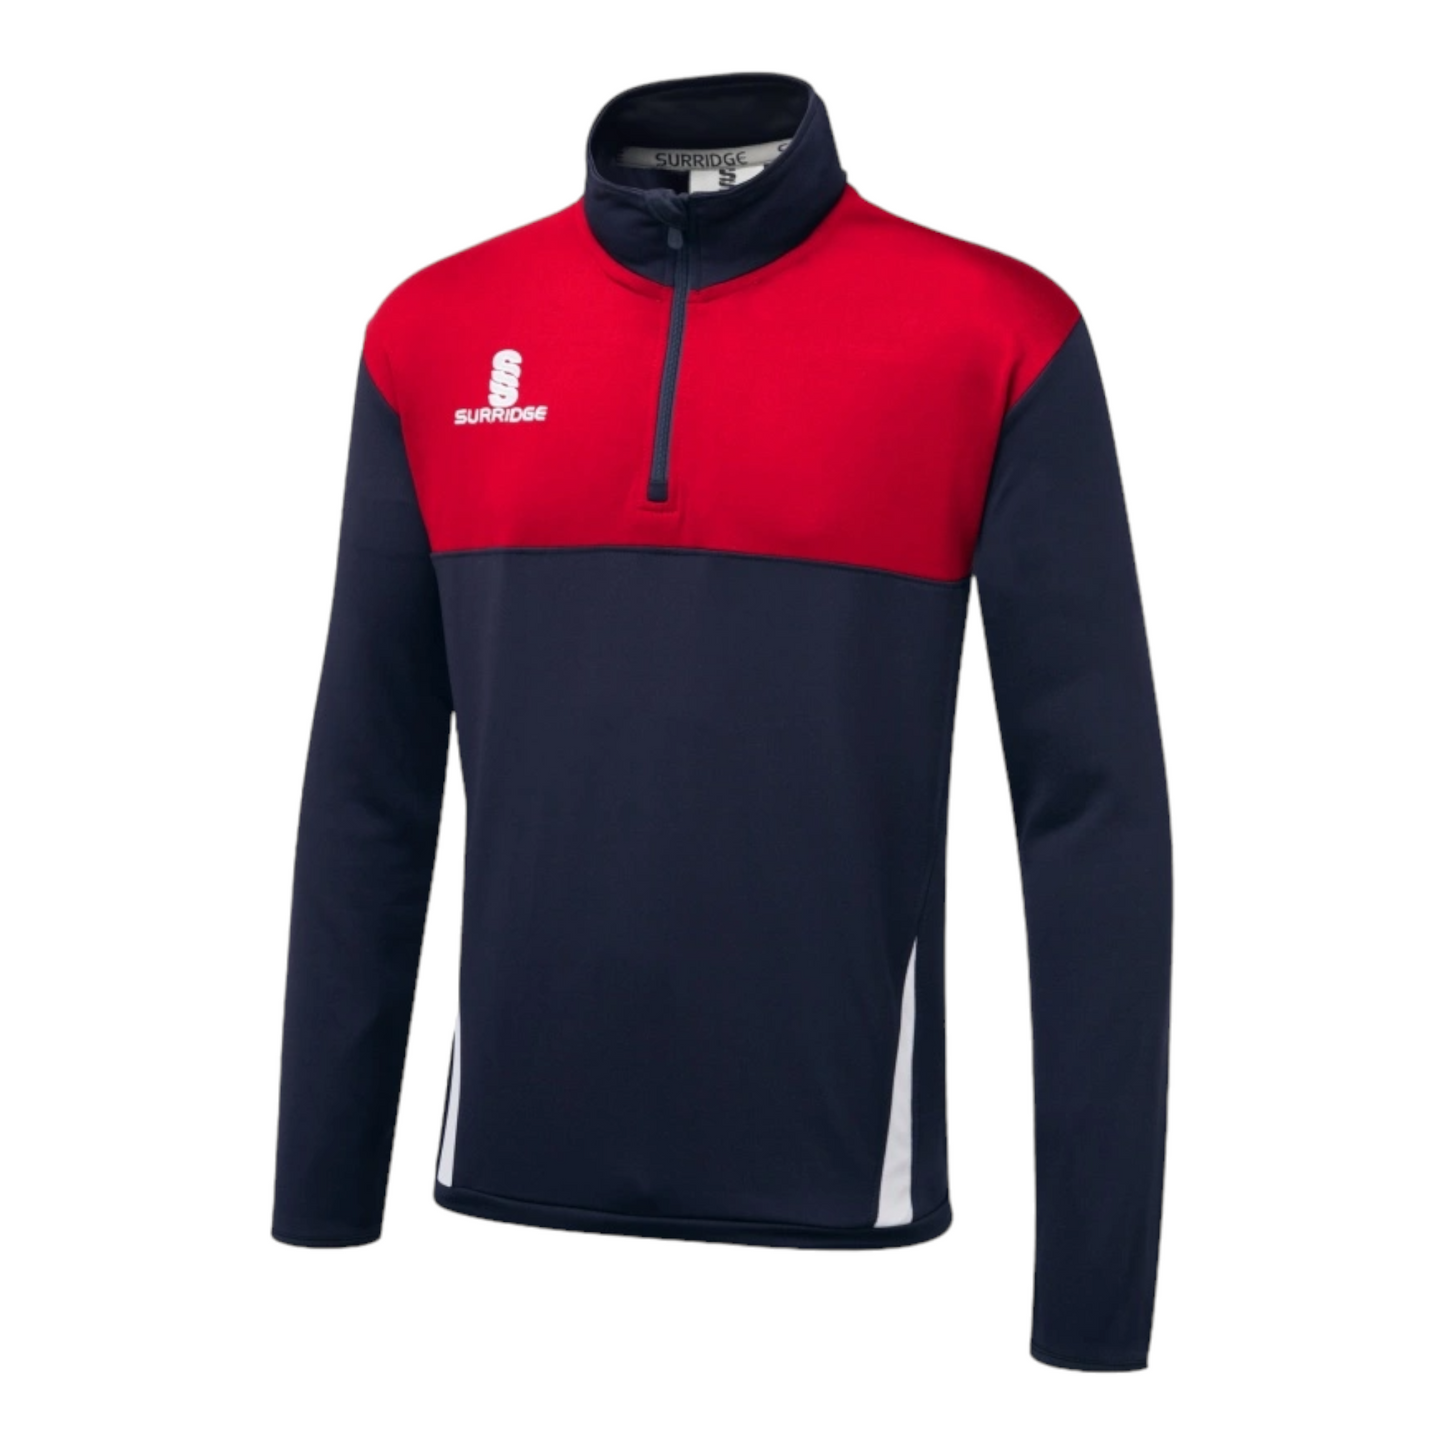 Blade Women's Performance Top Navy/Red/White